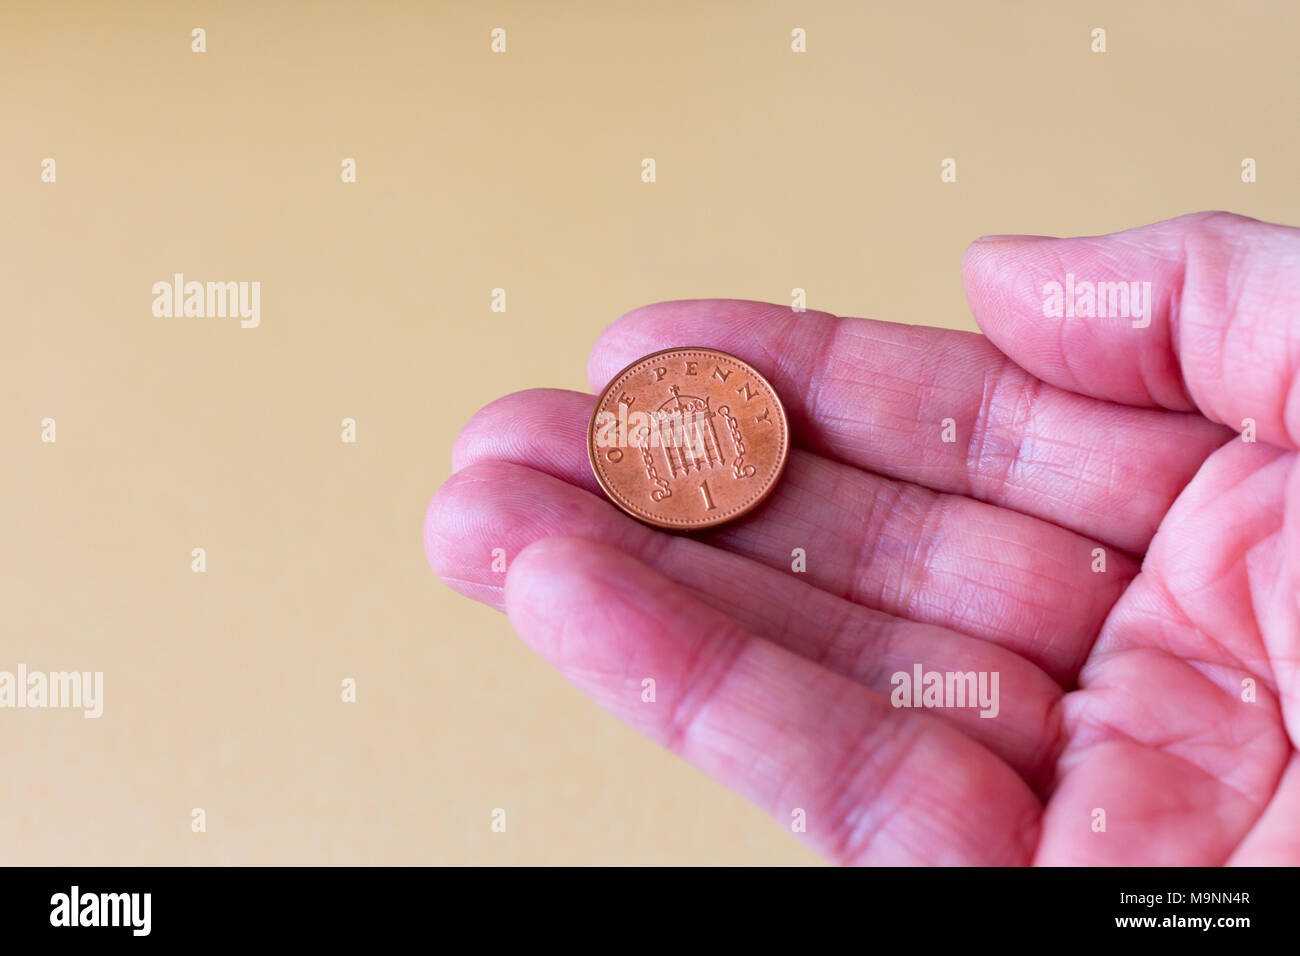 Female hand holding a British sterling one pence (penny) coin, United Kingdom Stock Photo